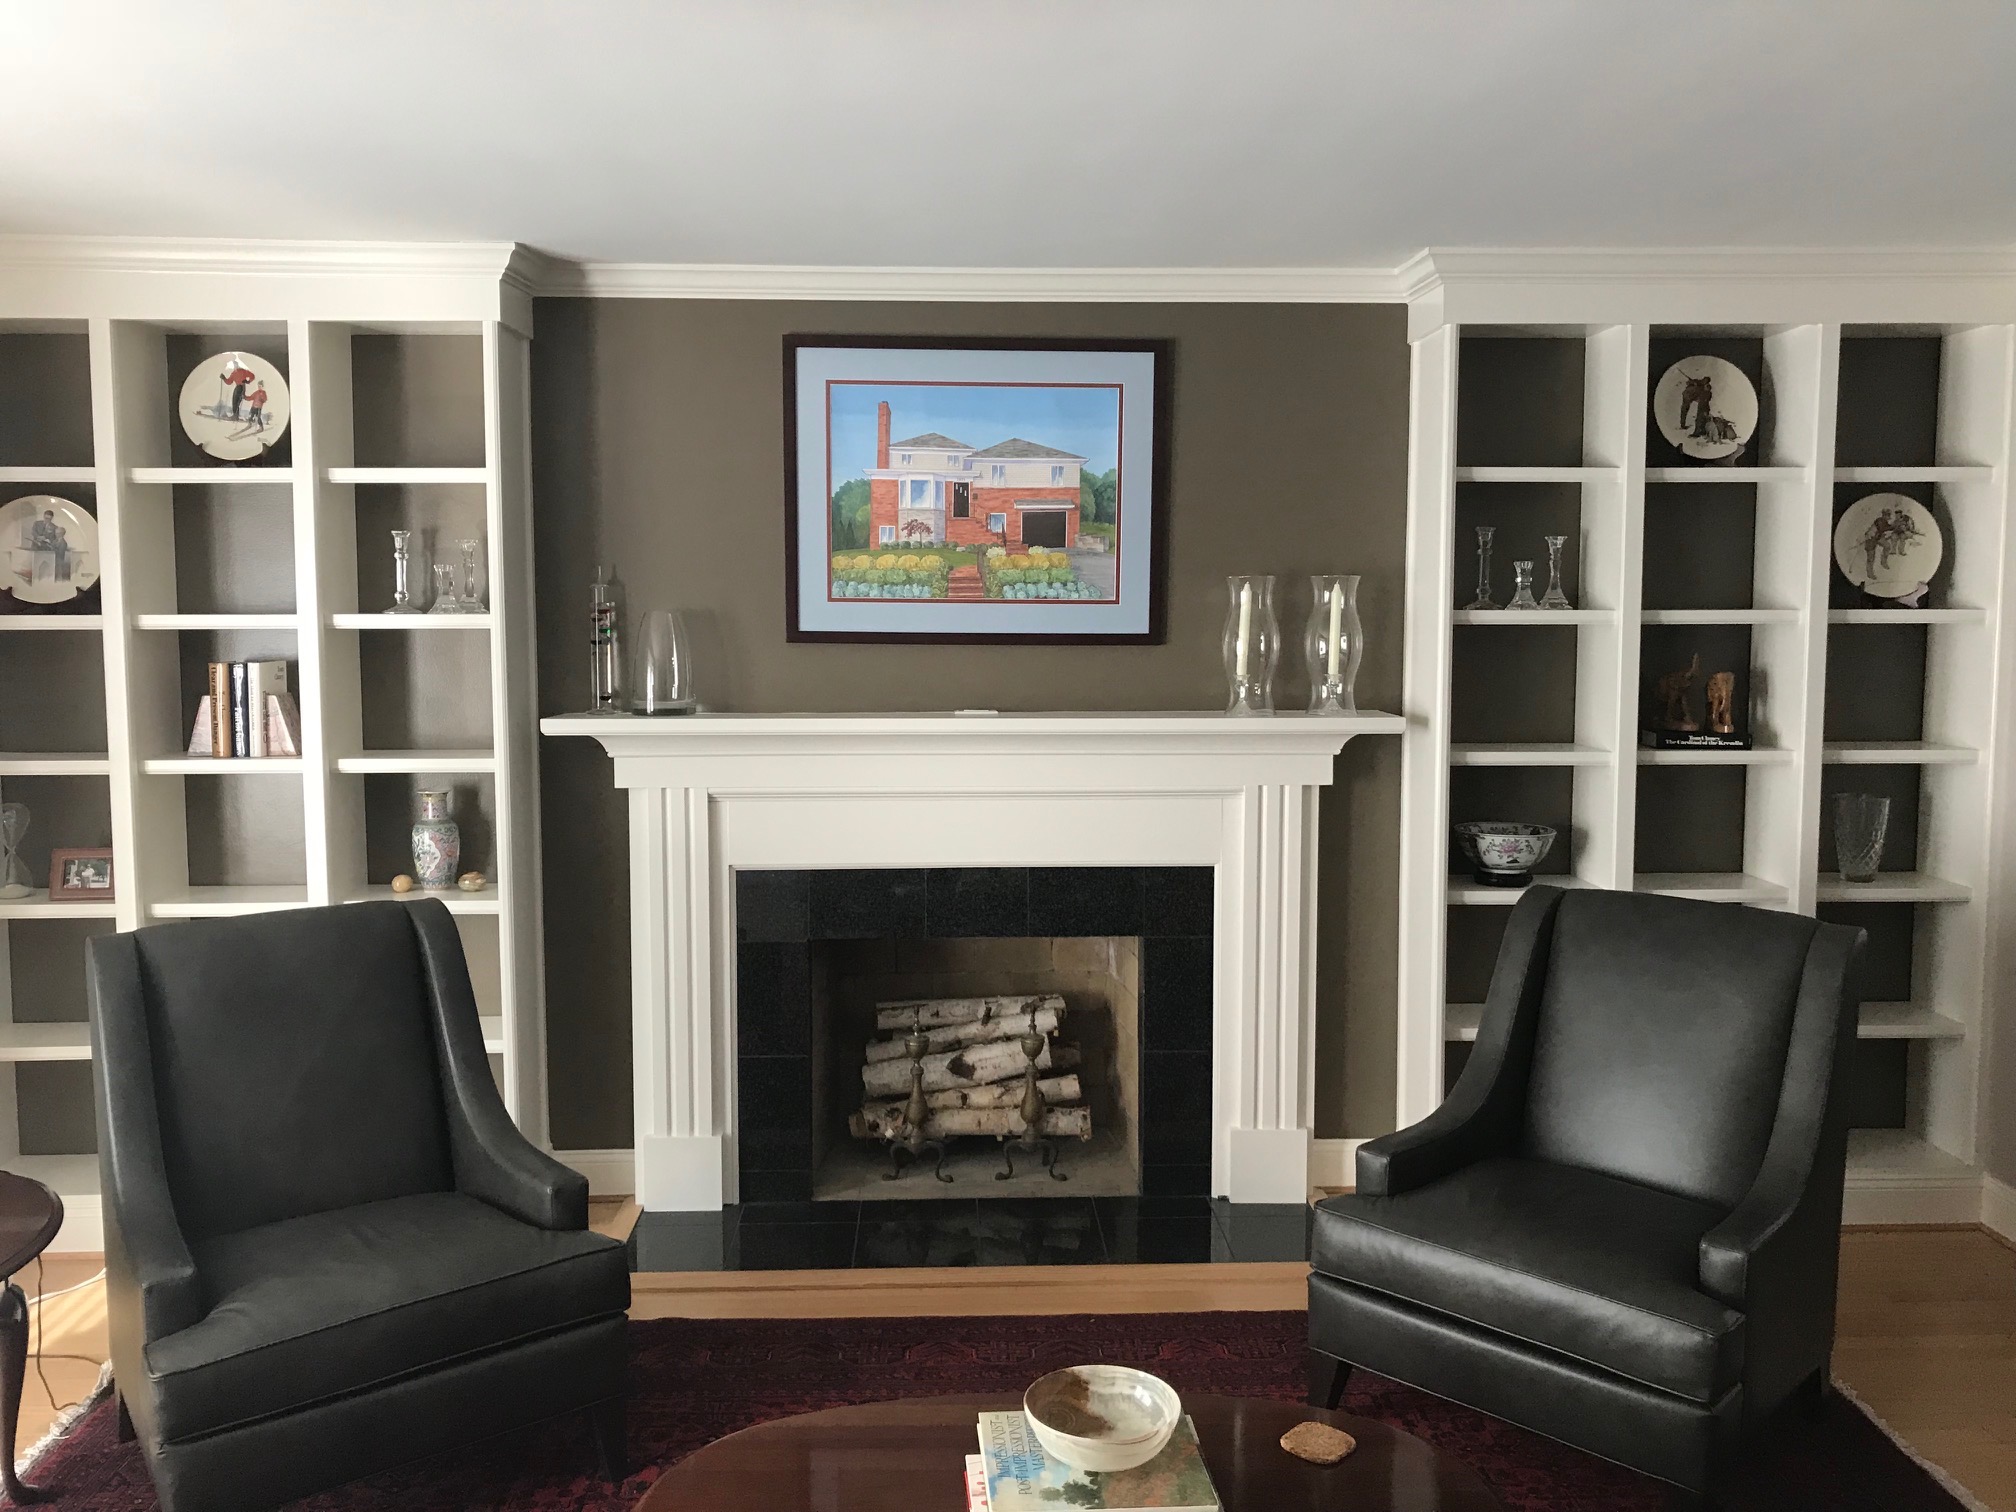 My larger size custom house portrait sits above this fire place in a beautiful Mid-Century Modern home in Arlington VA